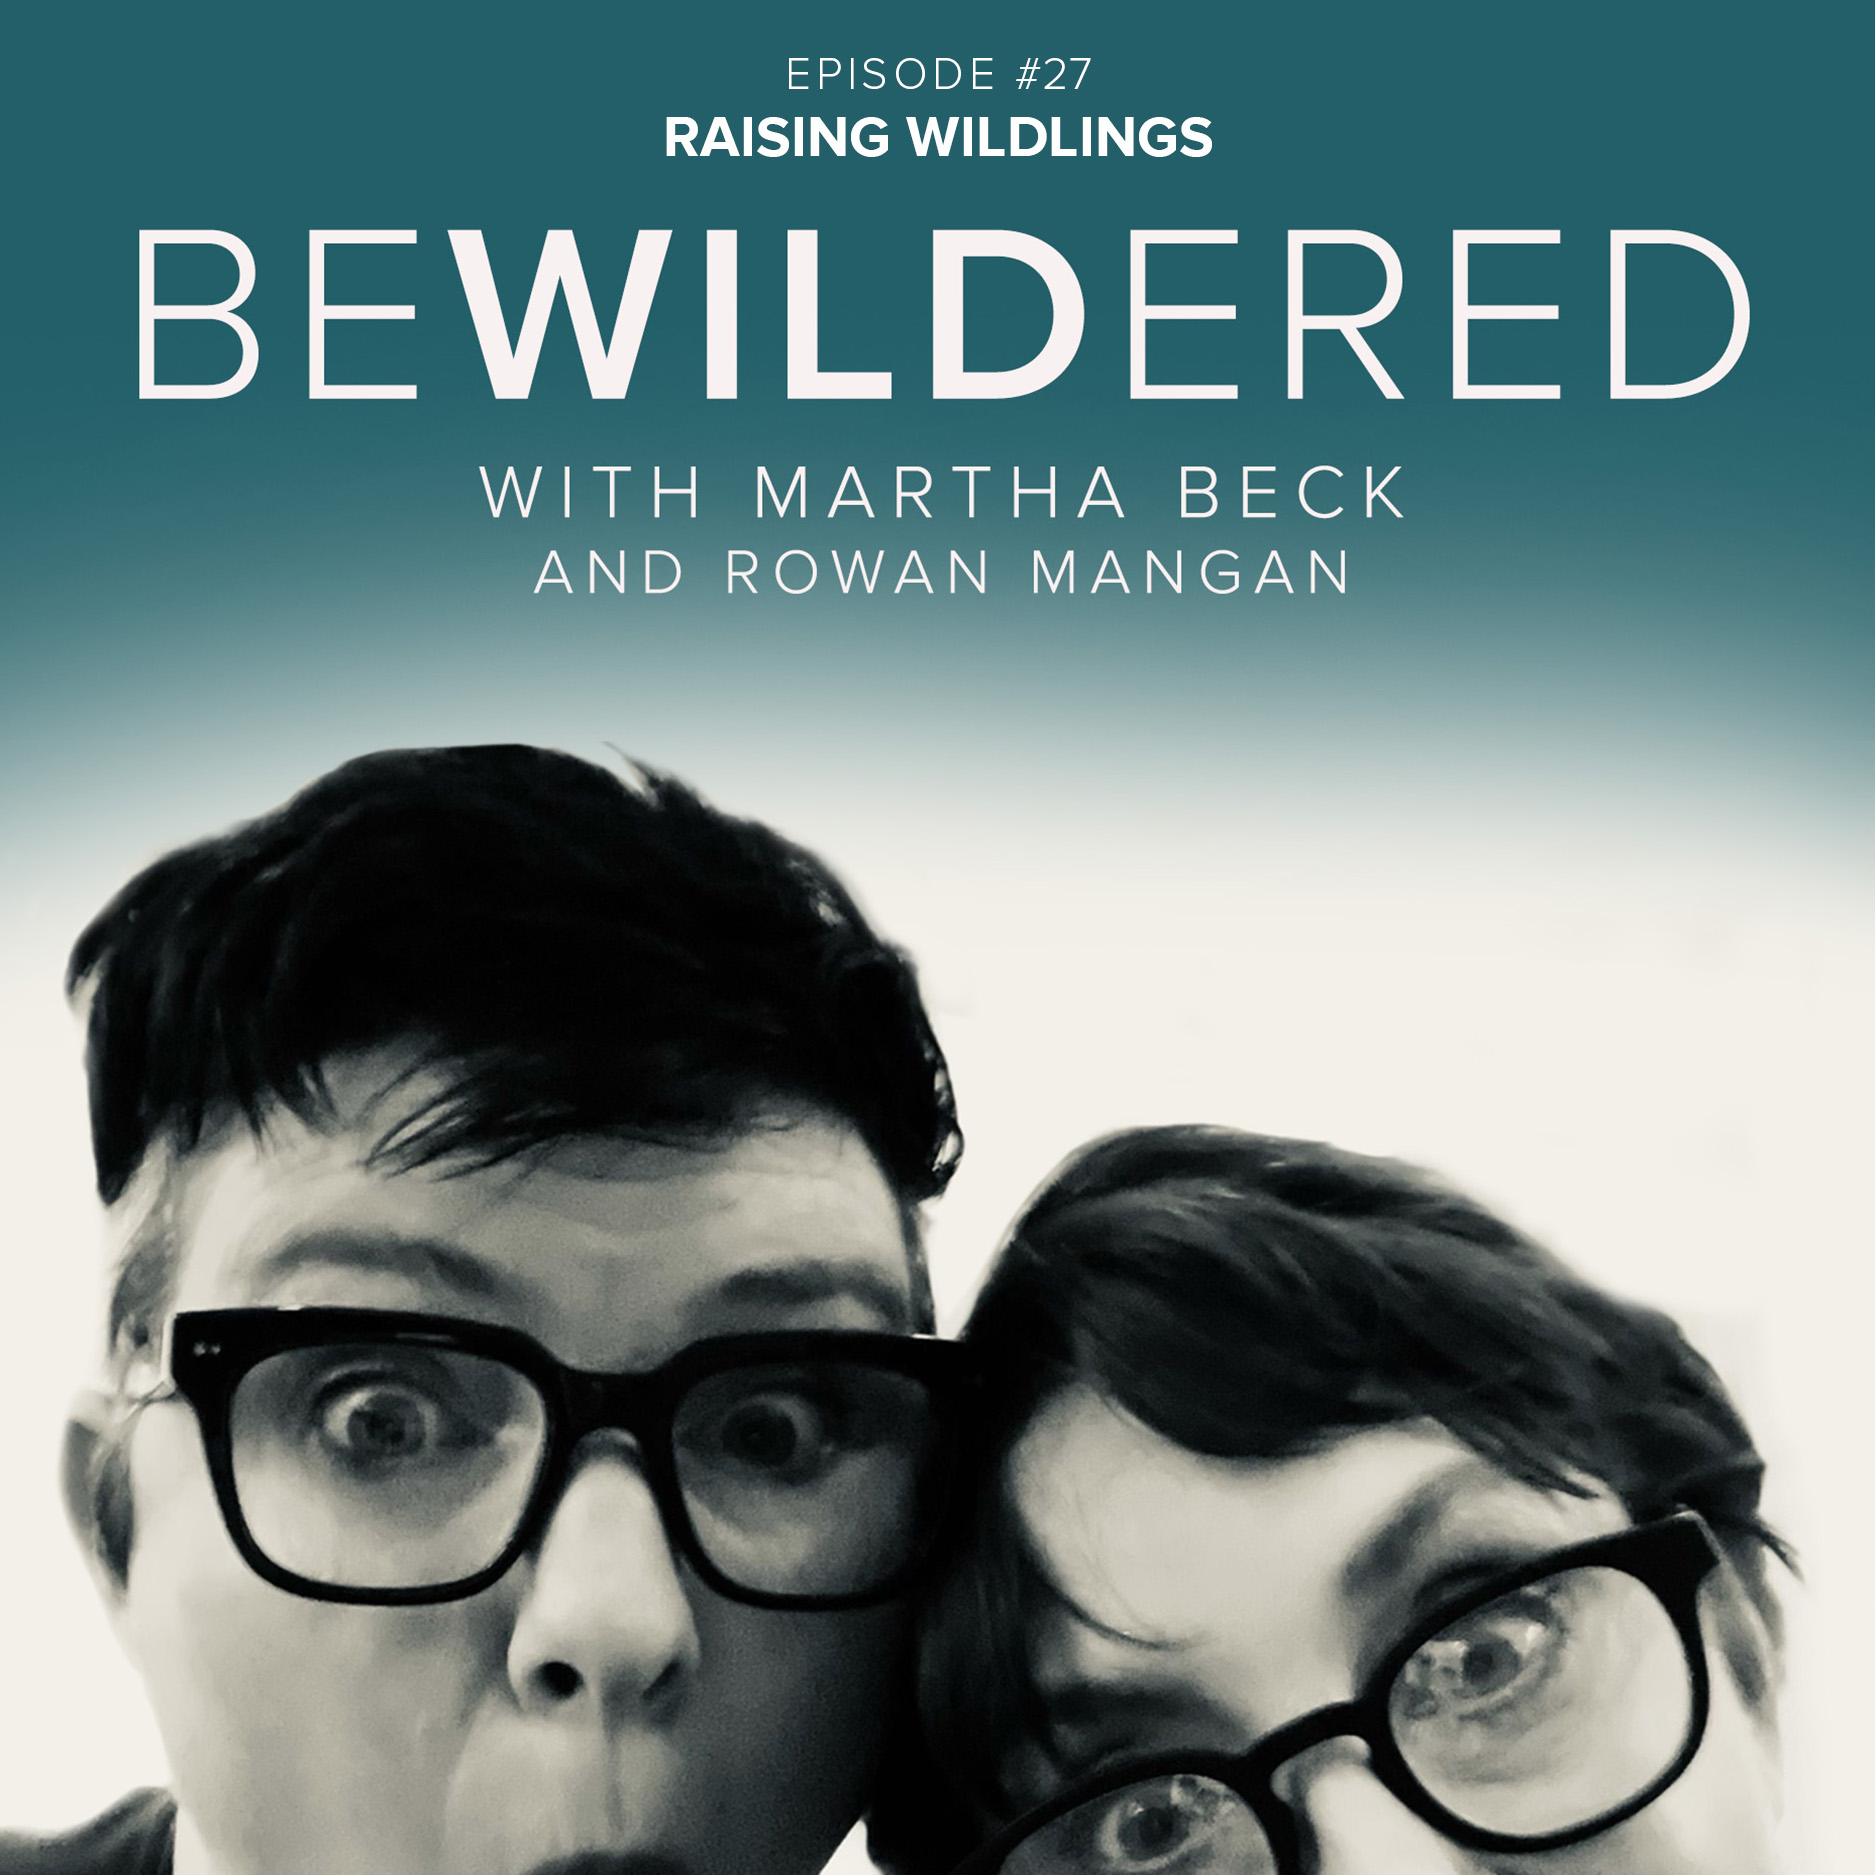 Image for Episode #27 Raising Wildlings for the Bewildered Podcast with Martha Beck and Rowan Mangan